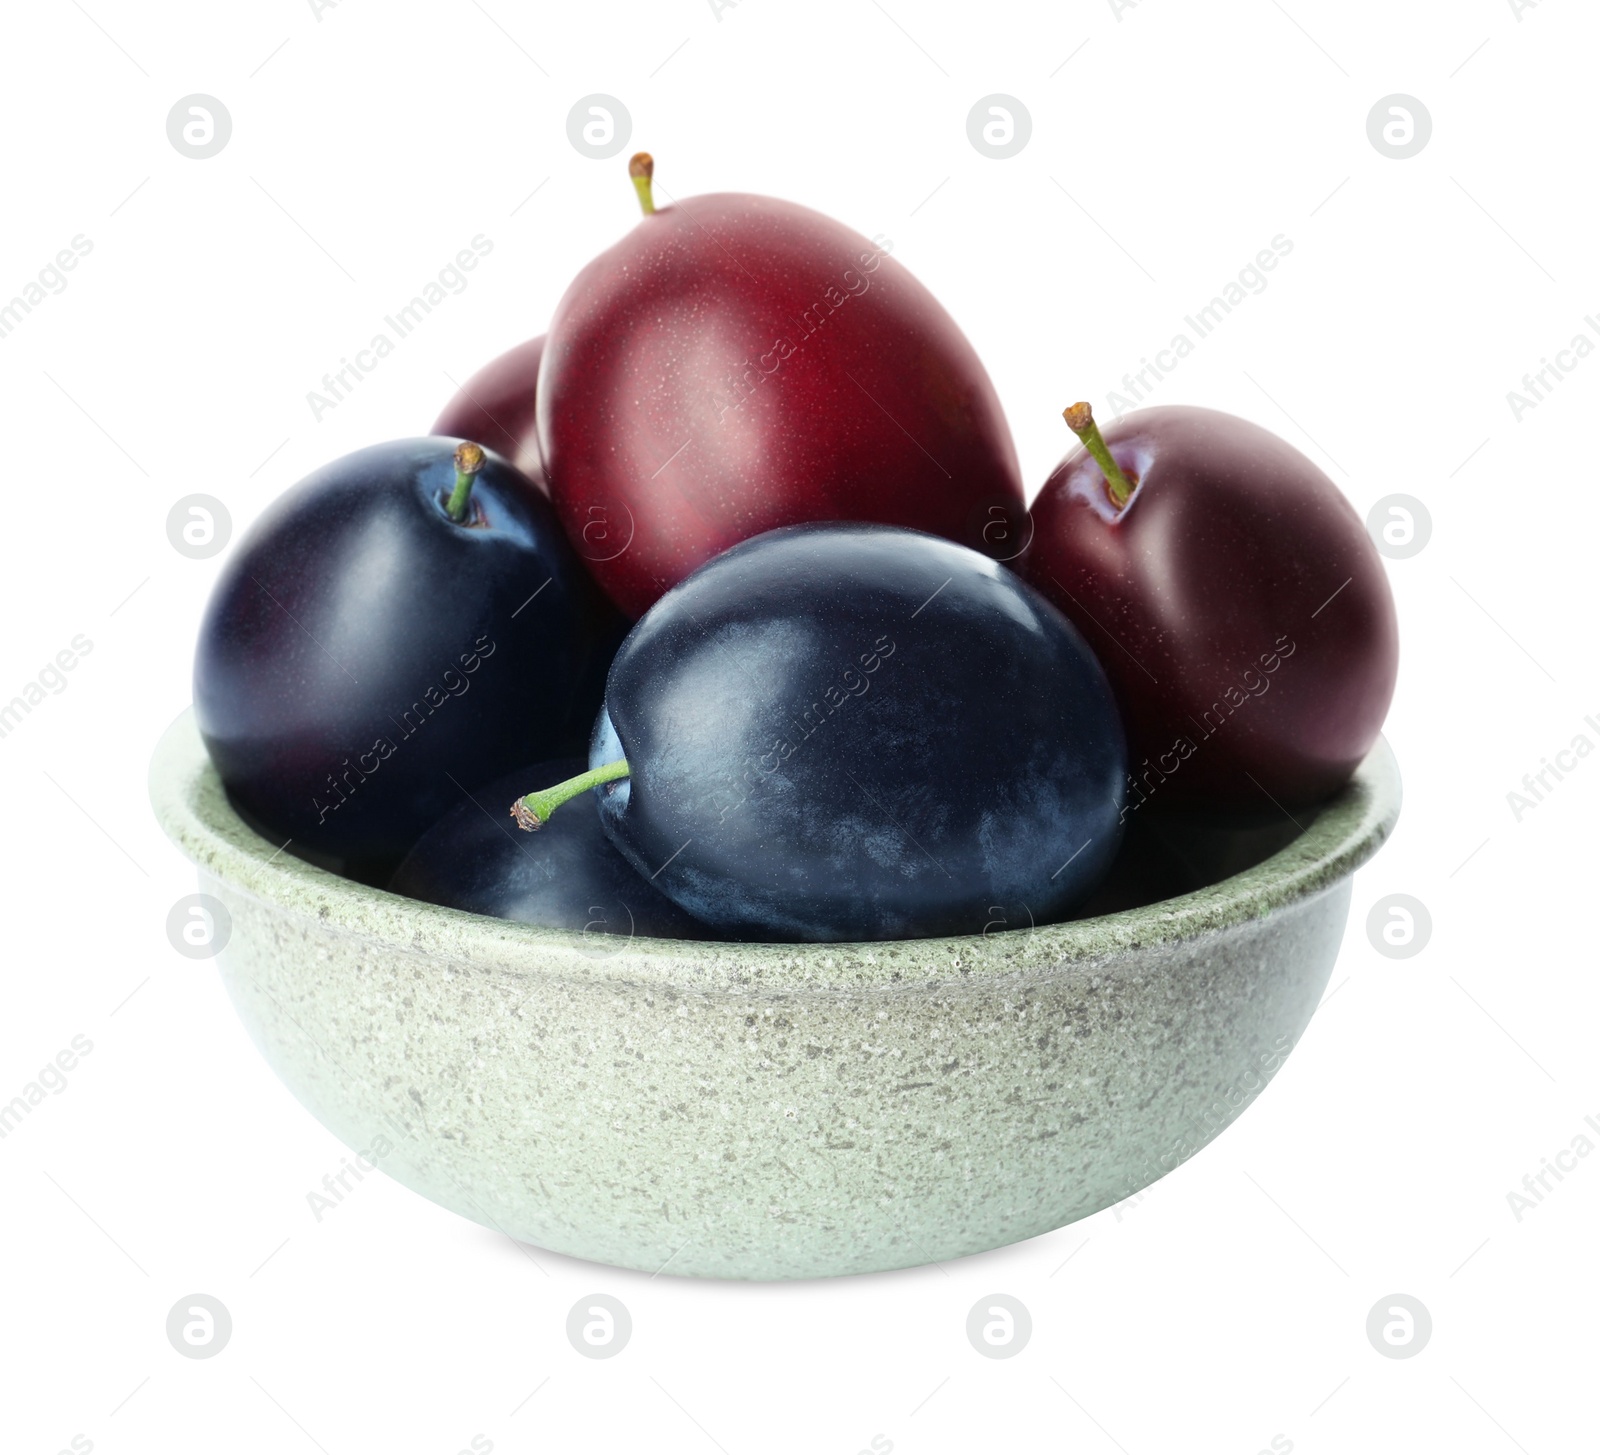 Photo of Bowl of delicious ripe plums on white background